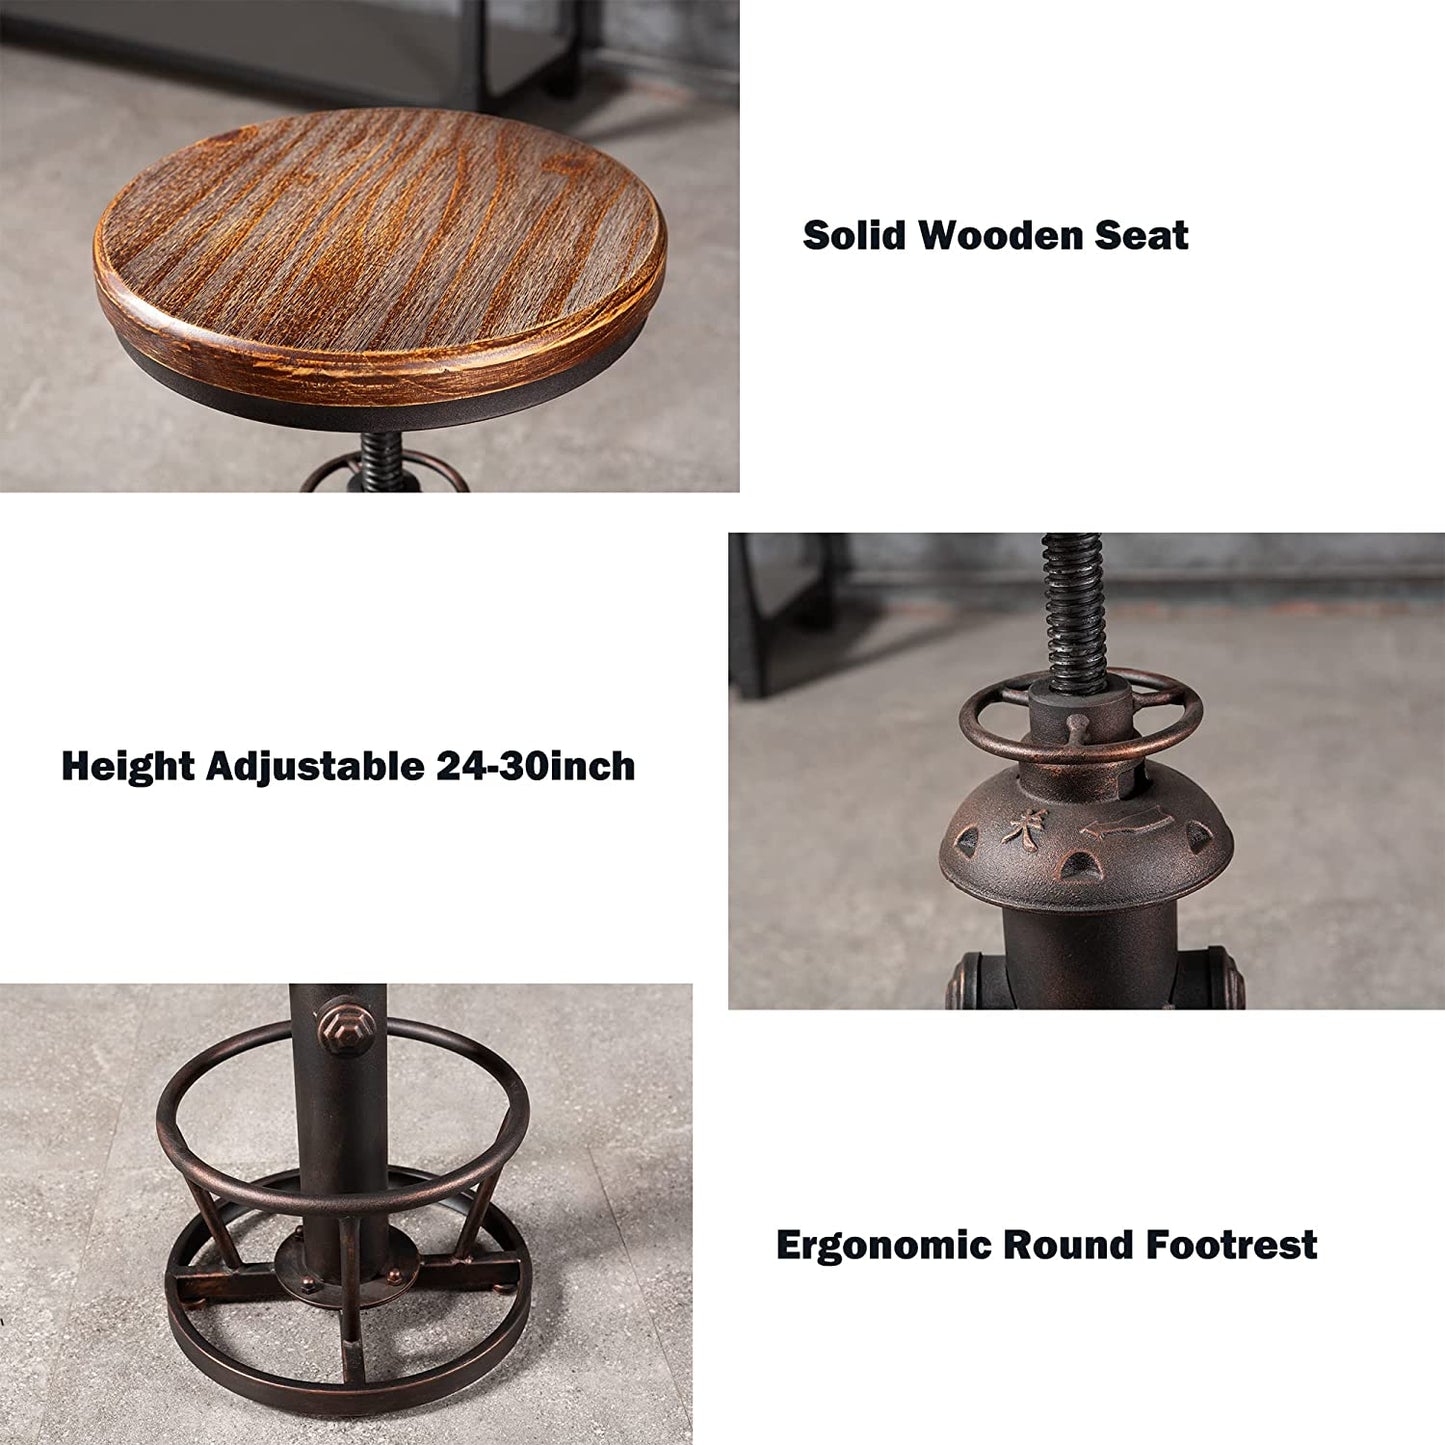 Industrial Bar Stools Kitchen Island Dining Chairs Swivel Wooden Seat Bar Counter Height Adjustable 25-31inch